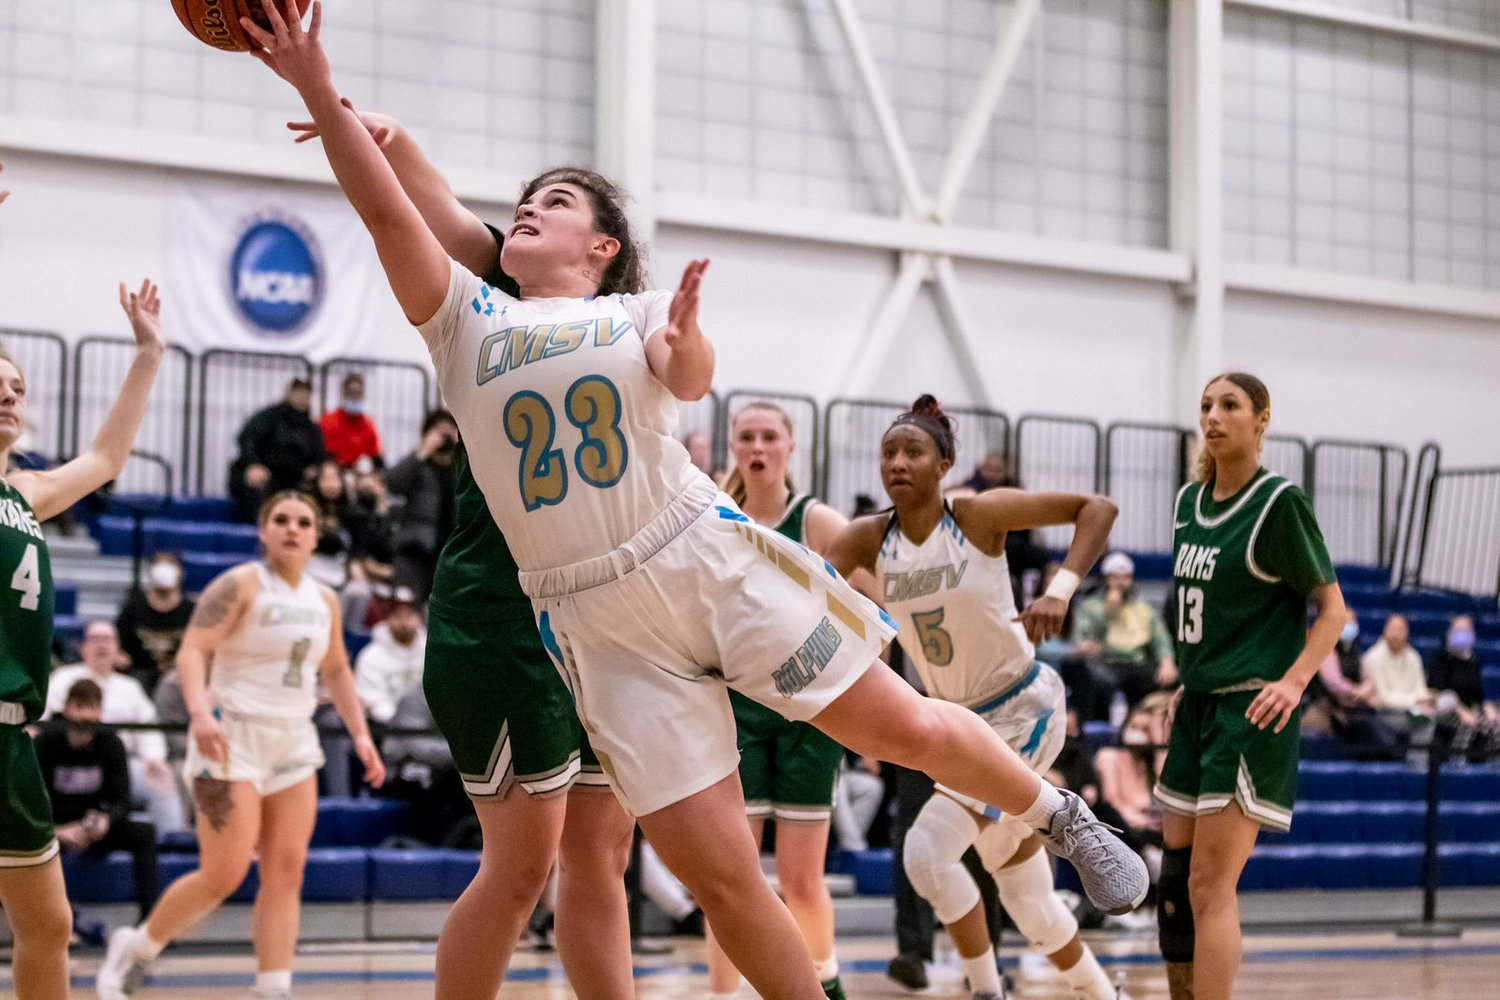 Kayla Hanley is a member of the women’s basketball team at the College of Mount Saint Vincent. But when it comes to addressing mental health in student-athletes, Hanley wants everyone to be on the same team while taking advantage of mental health resources like Everfi being offered at The Mount.